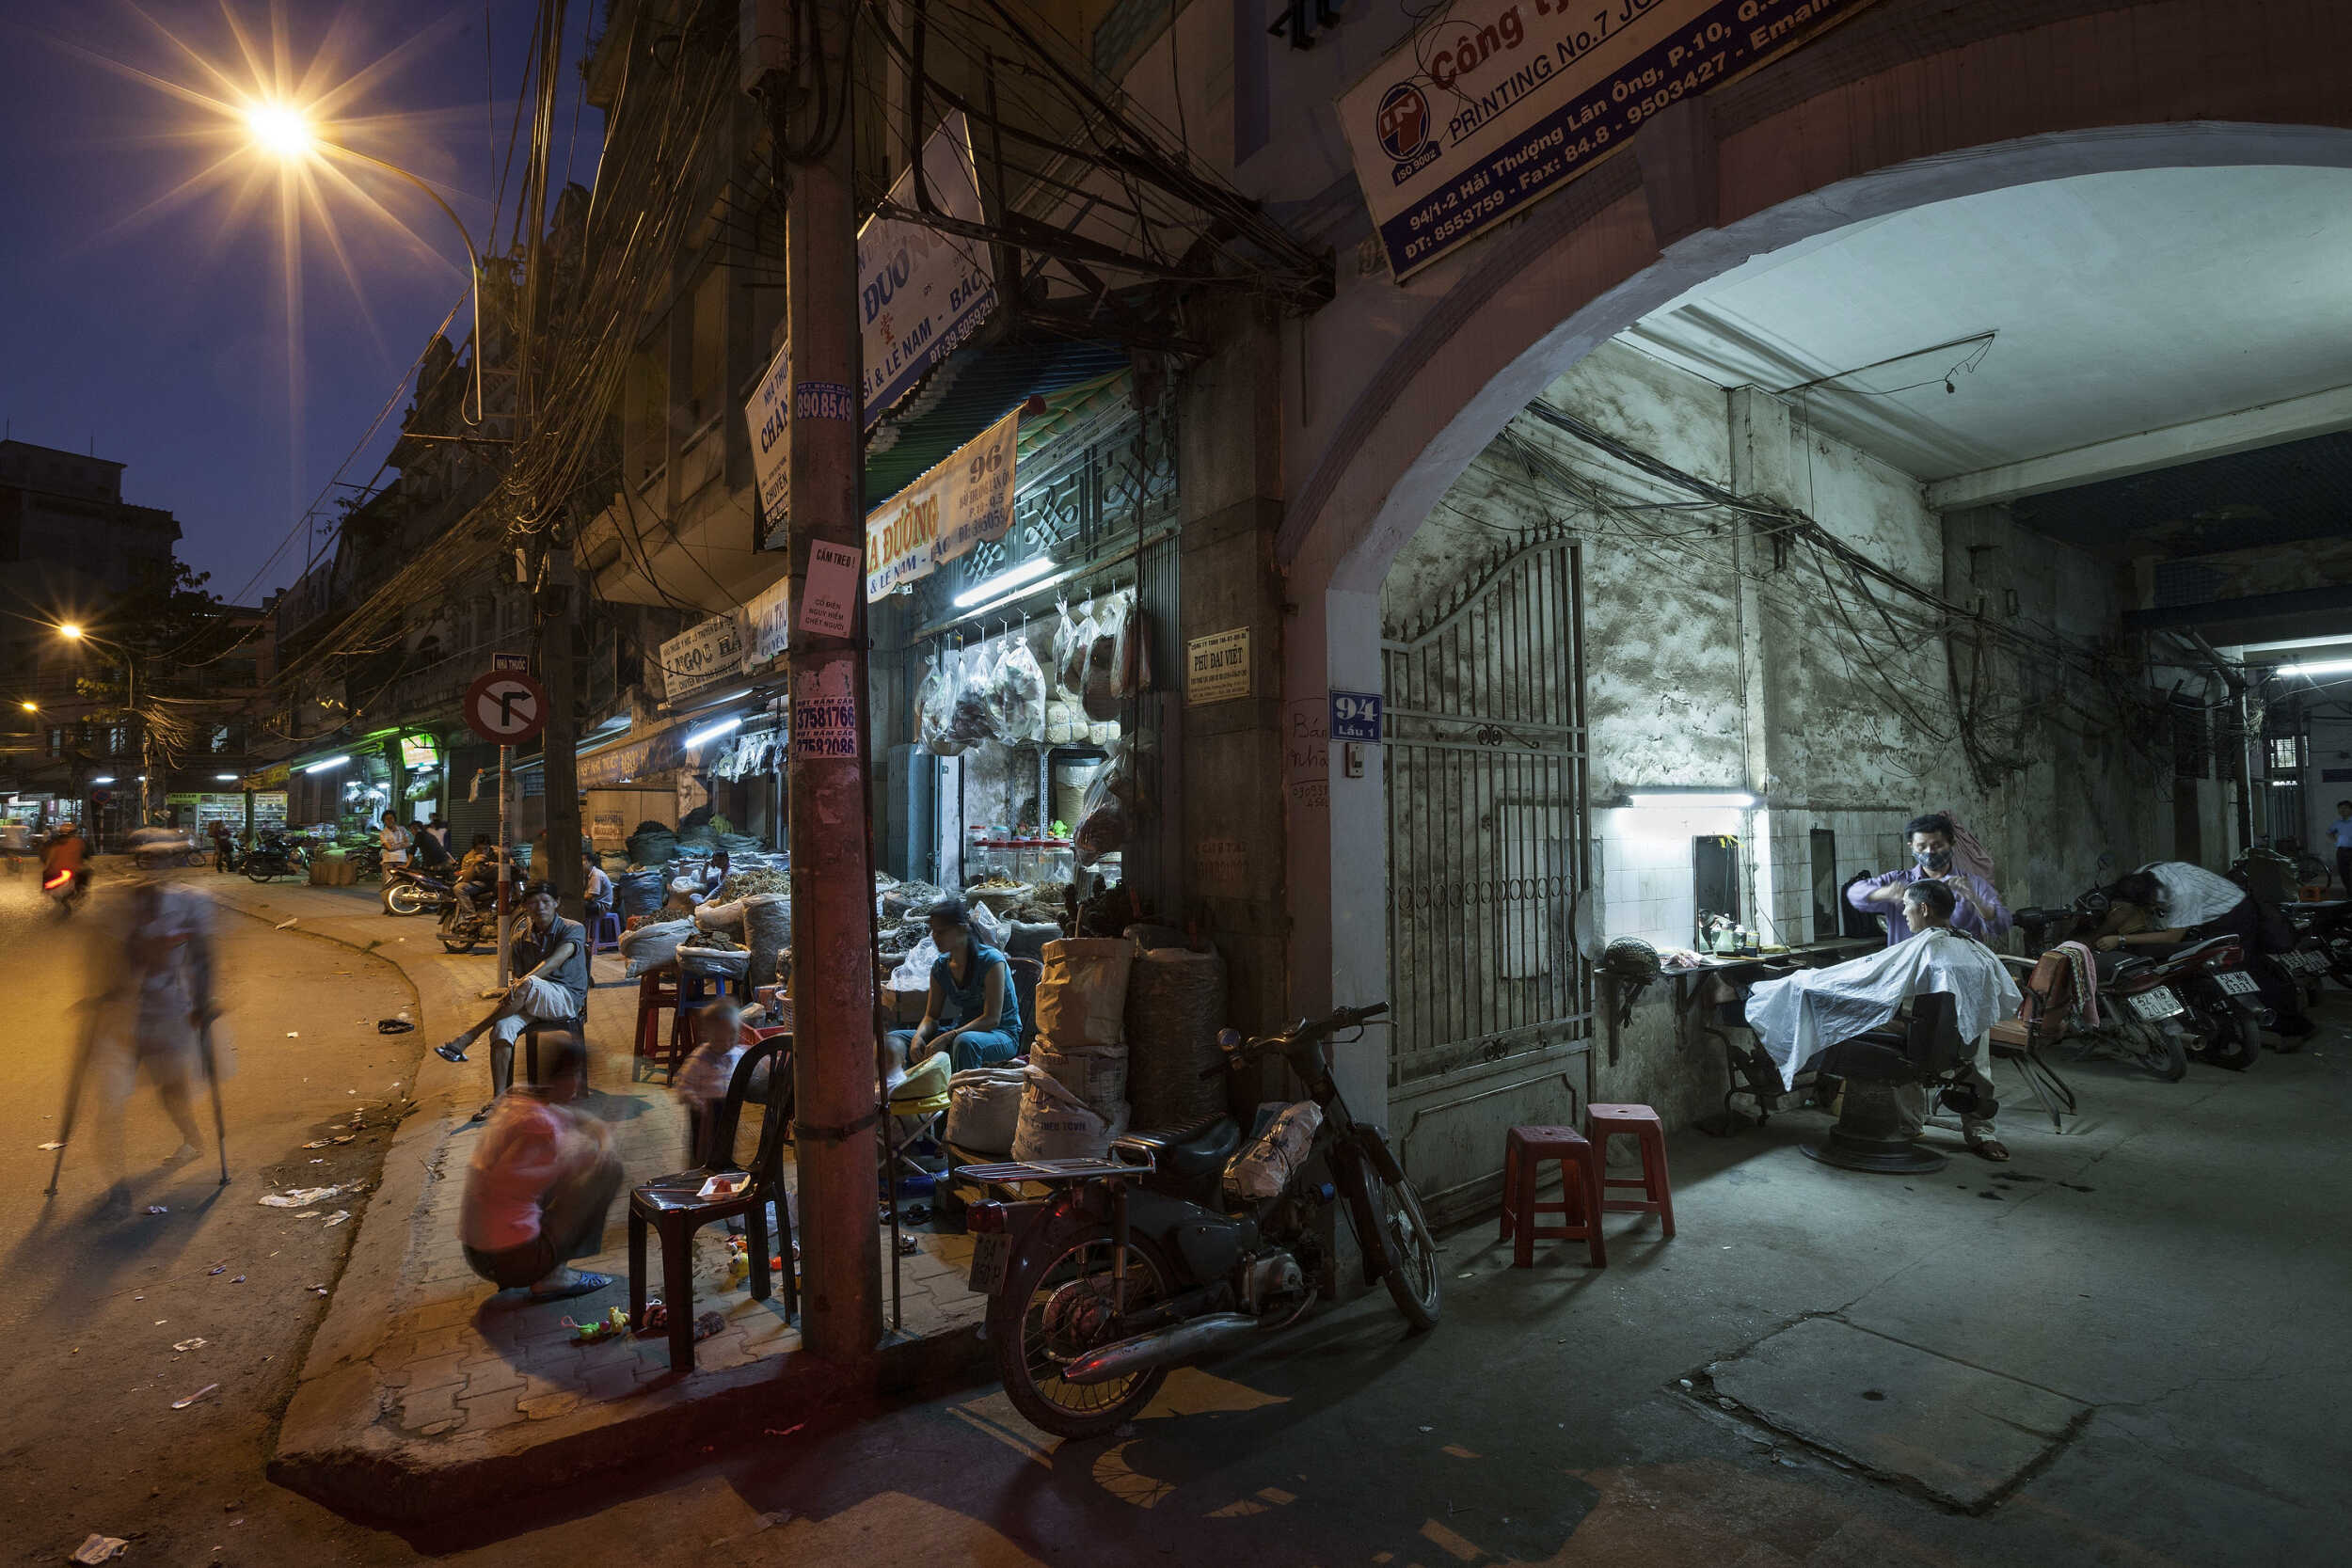 Editorial photograph of an alleyway barbershop along a street lined with traditional herb shops in Cholon, Ho chi Minh City, Vietnam.